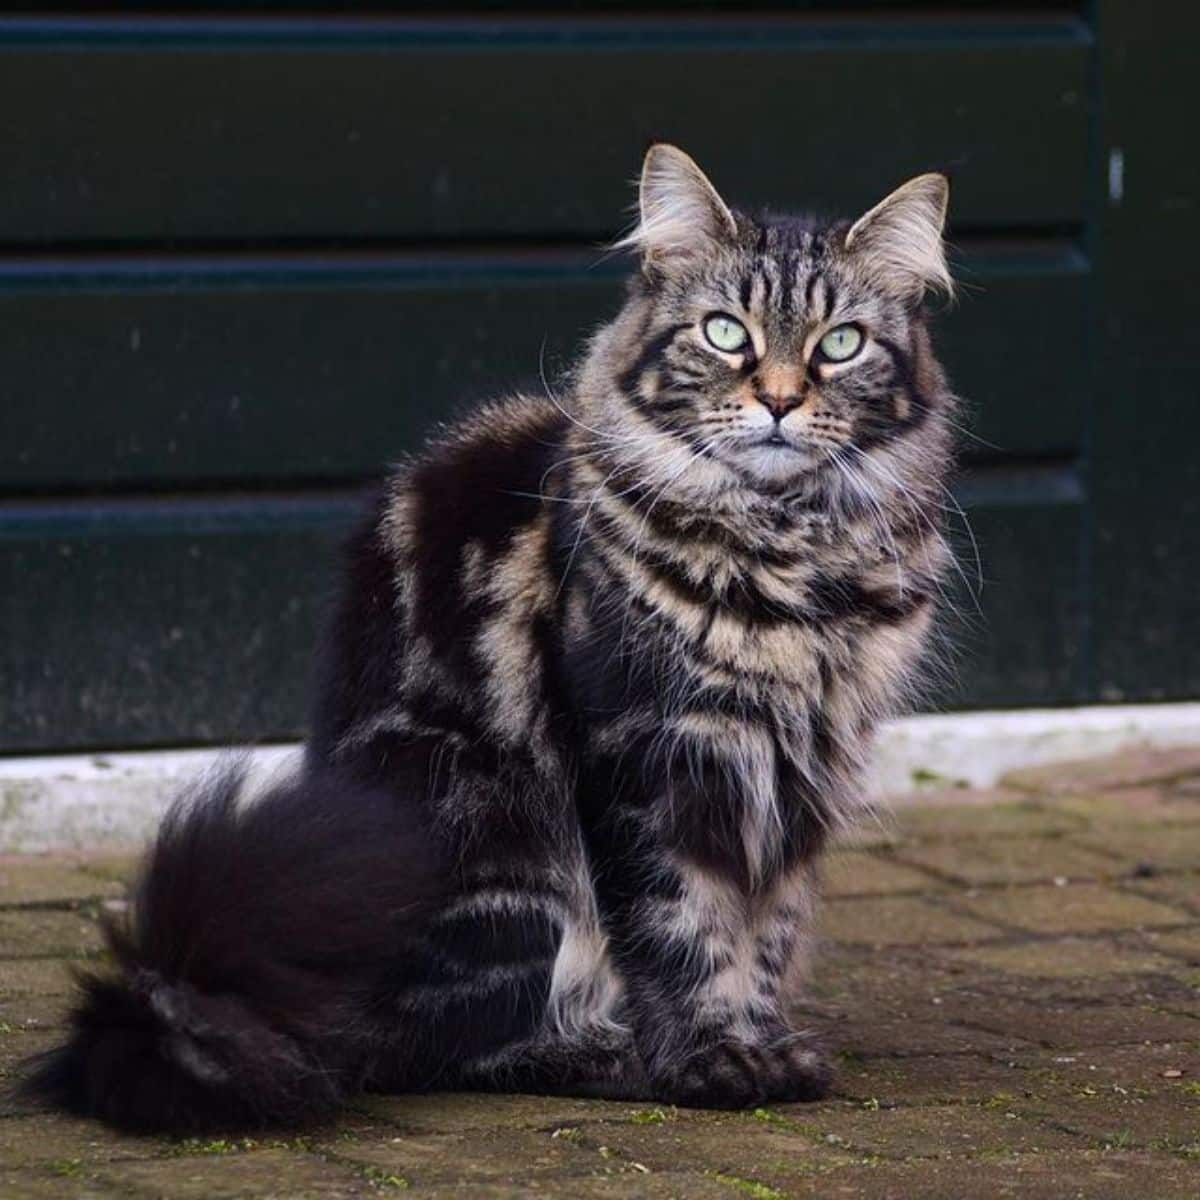 A beautiful black maine coon sitting on a pavement.